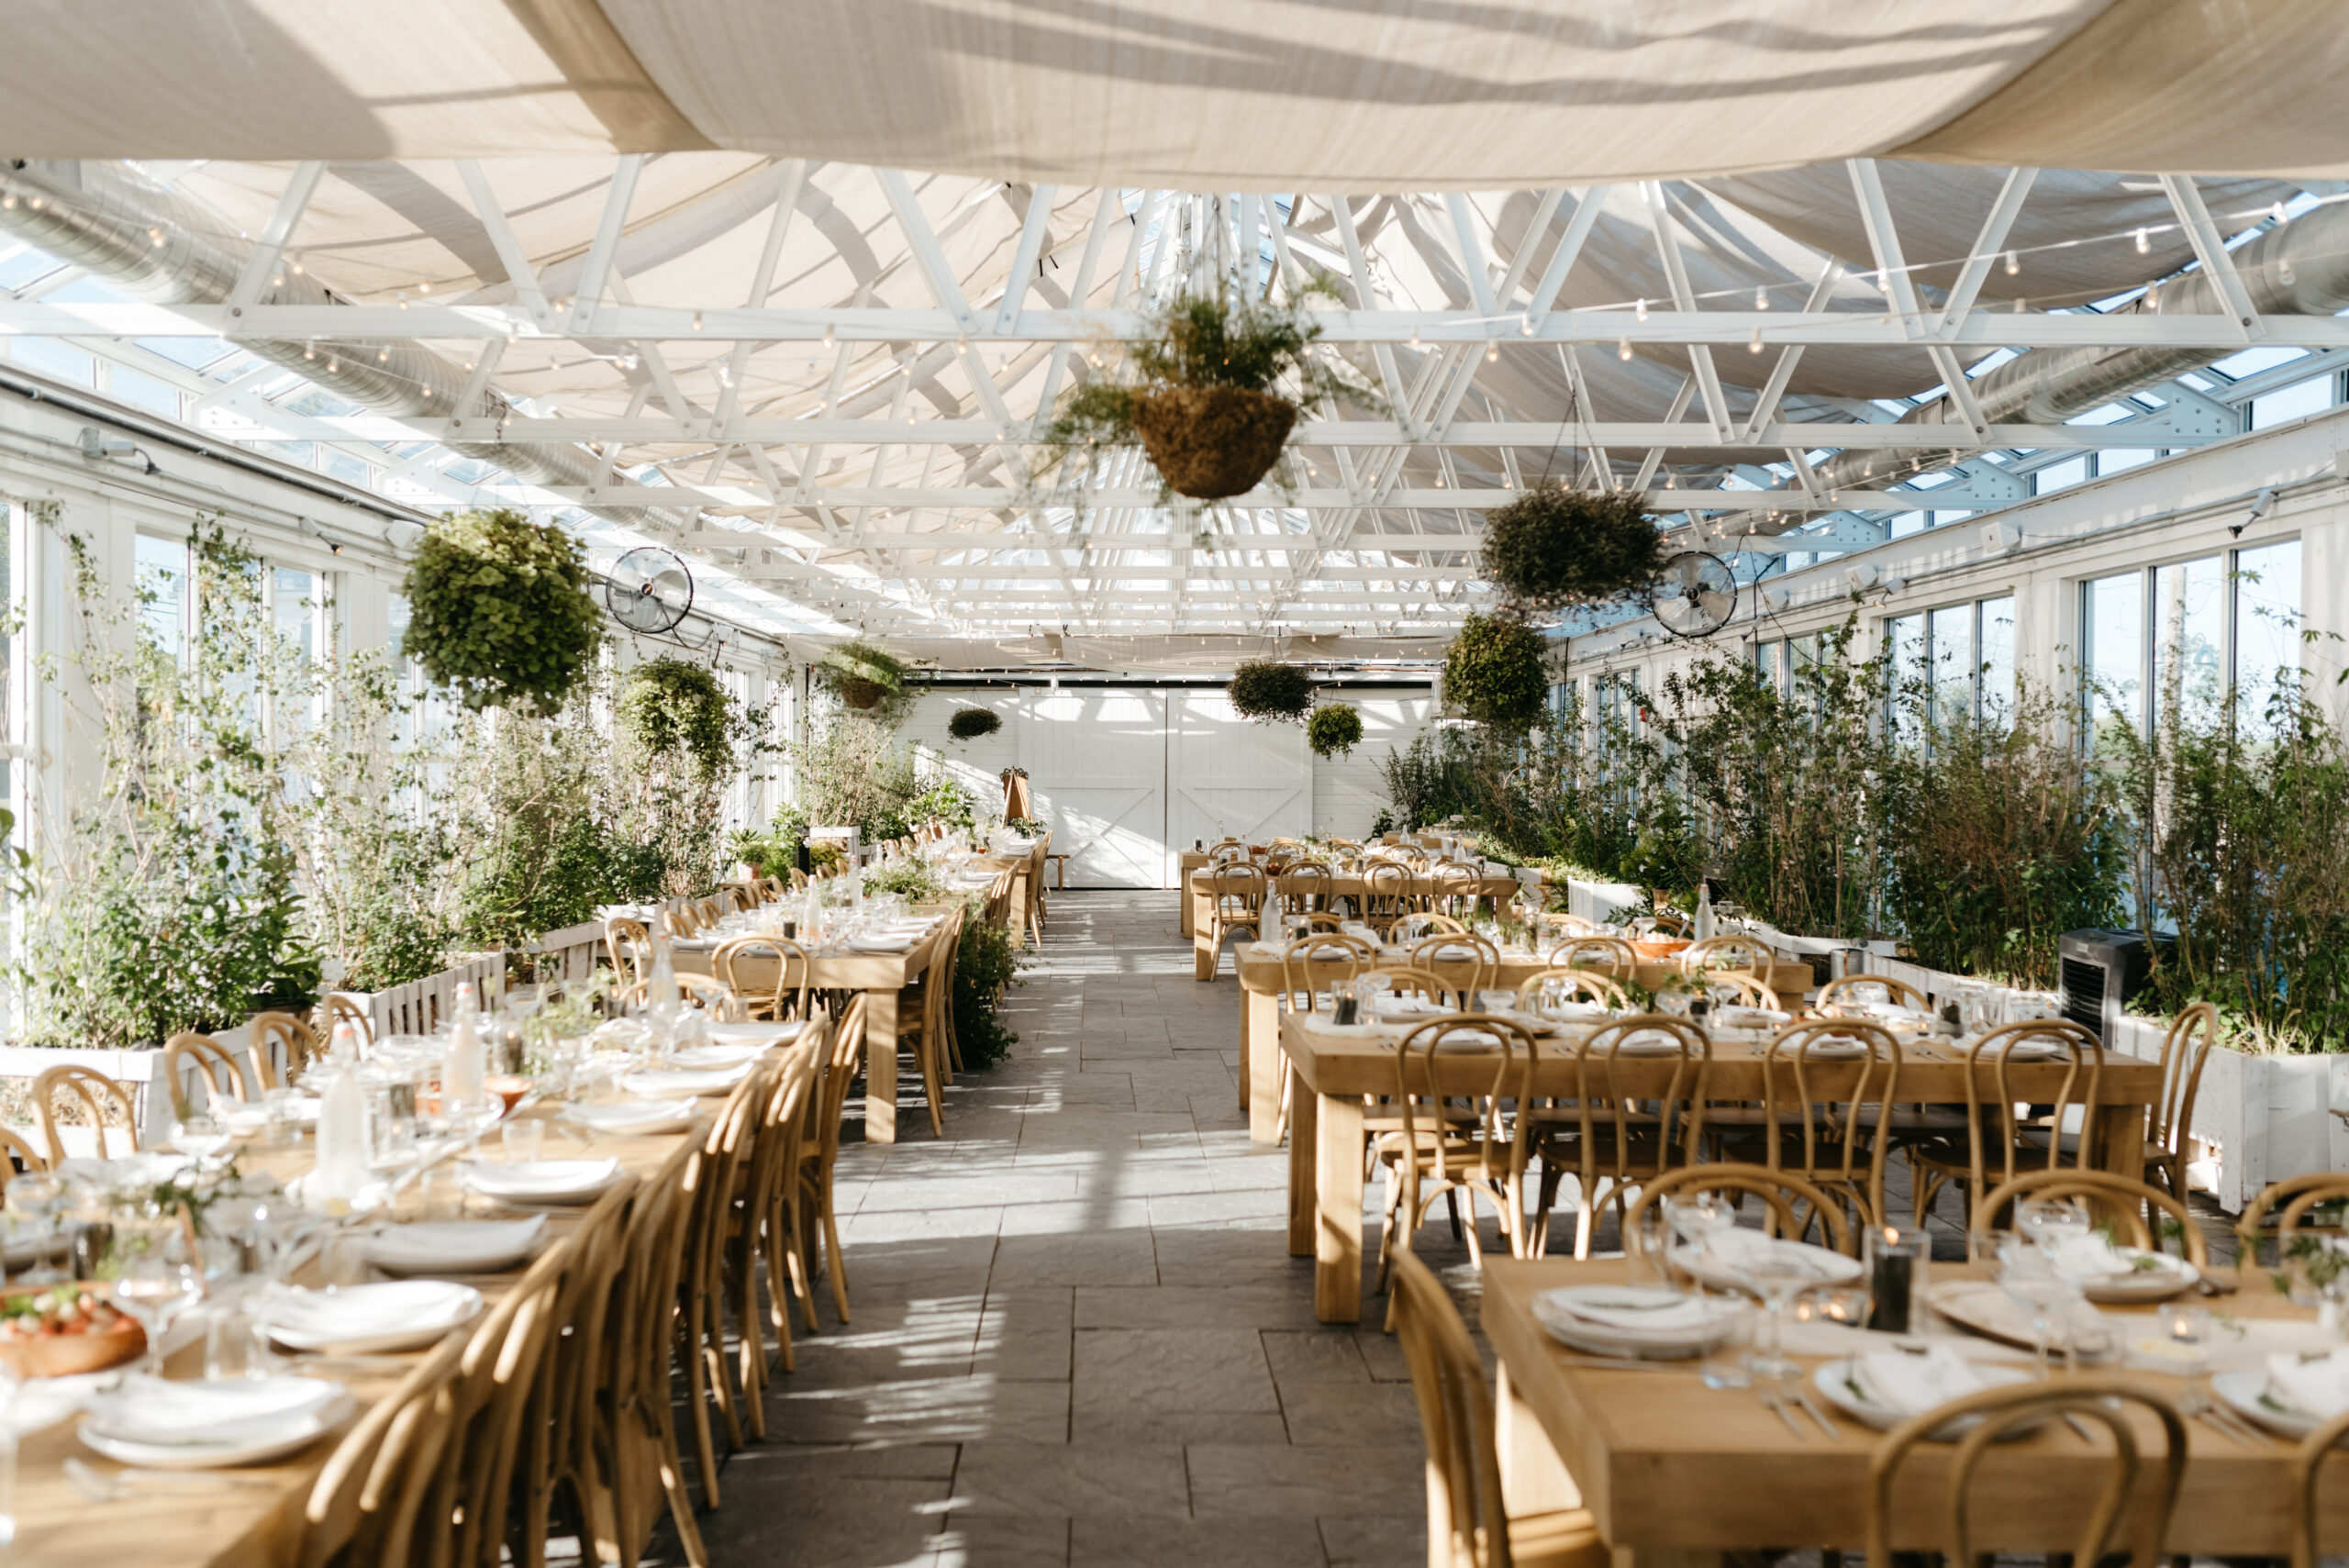 Audrey's farmhouse wedding, interior greenhouse with wooden tables and glass centerpieces surrounded by white florals